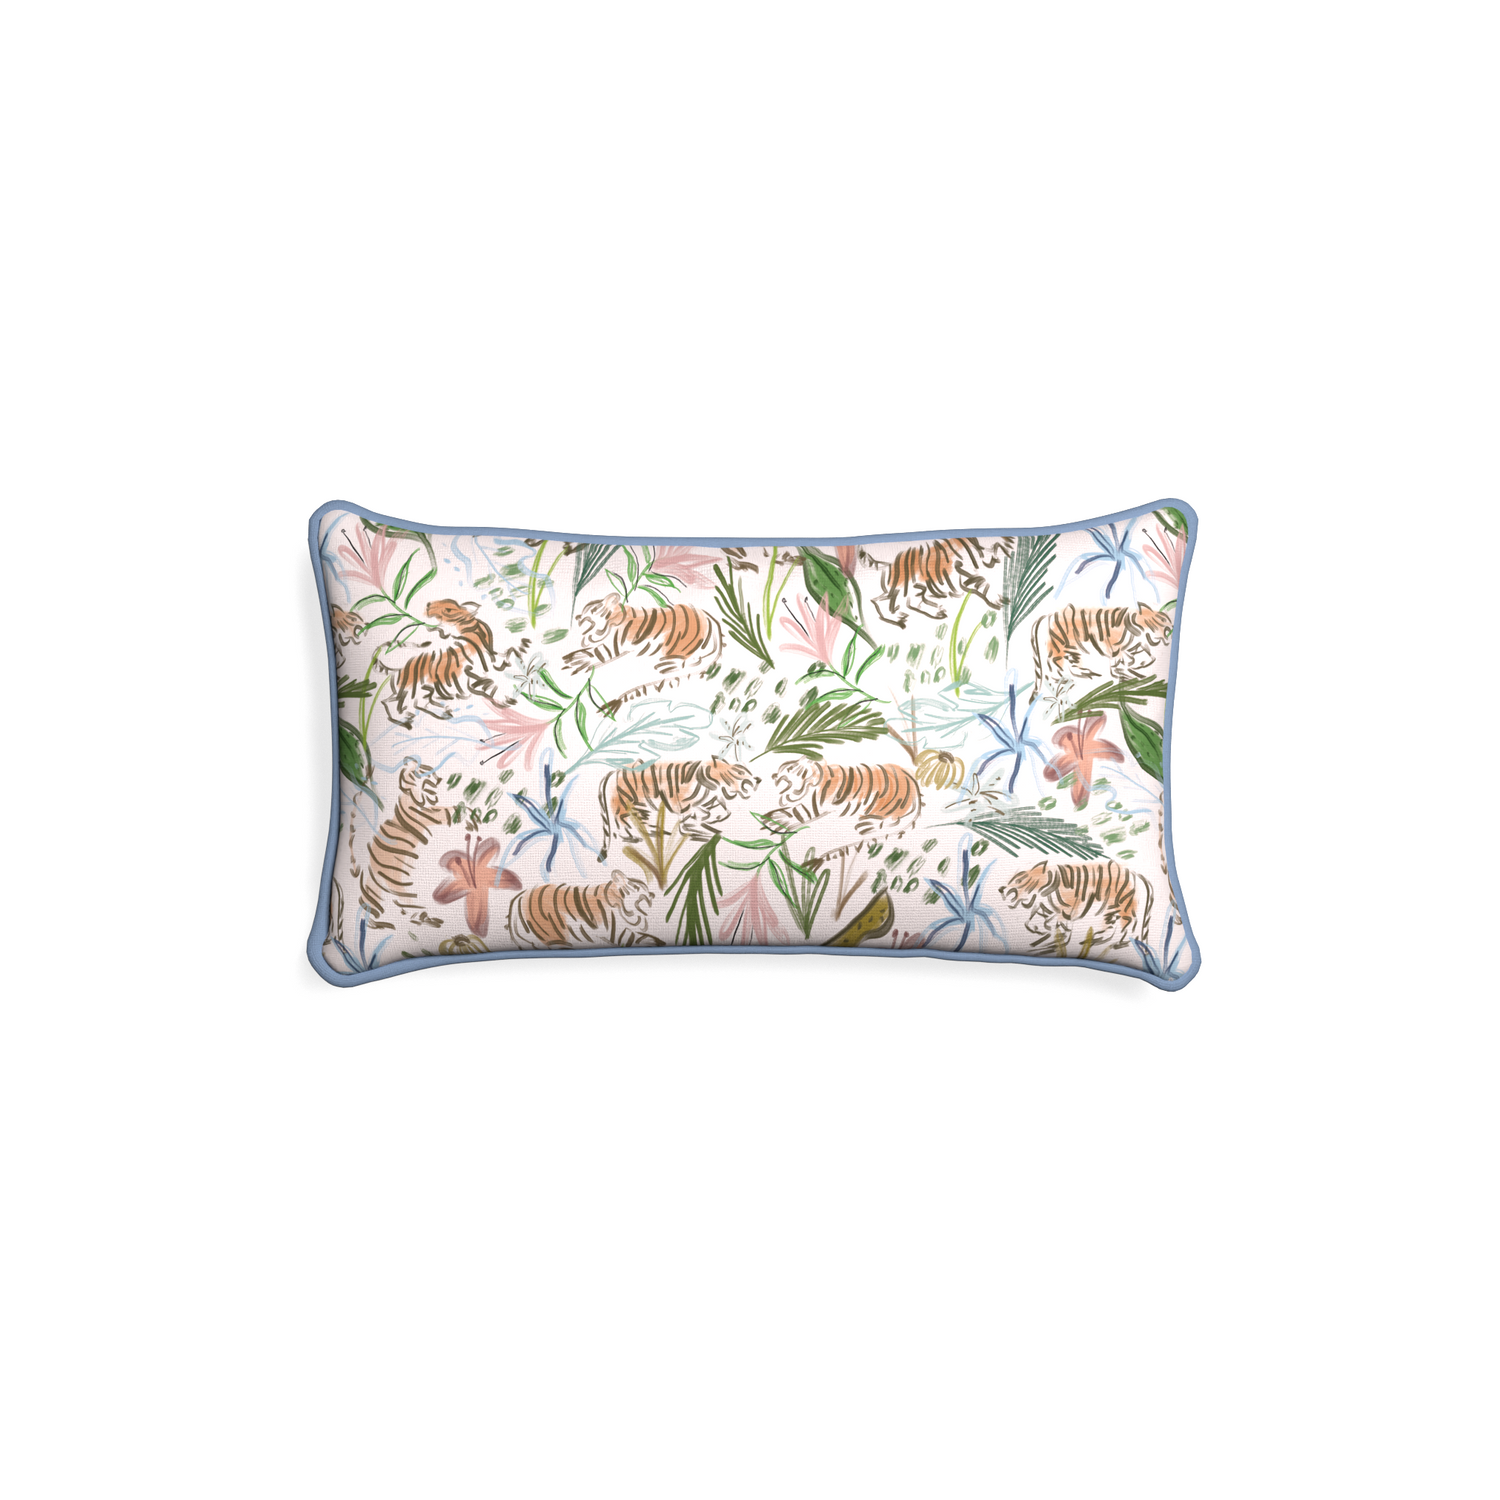 Petite-lumbar frida pink custom pink chinoiserie tigerpillow with sky piping on white background